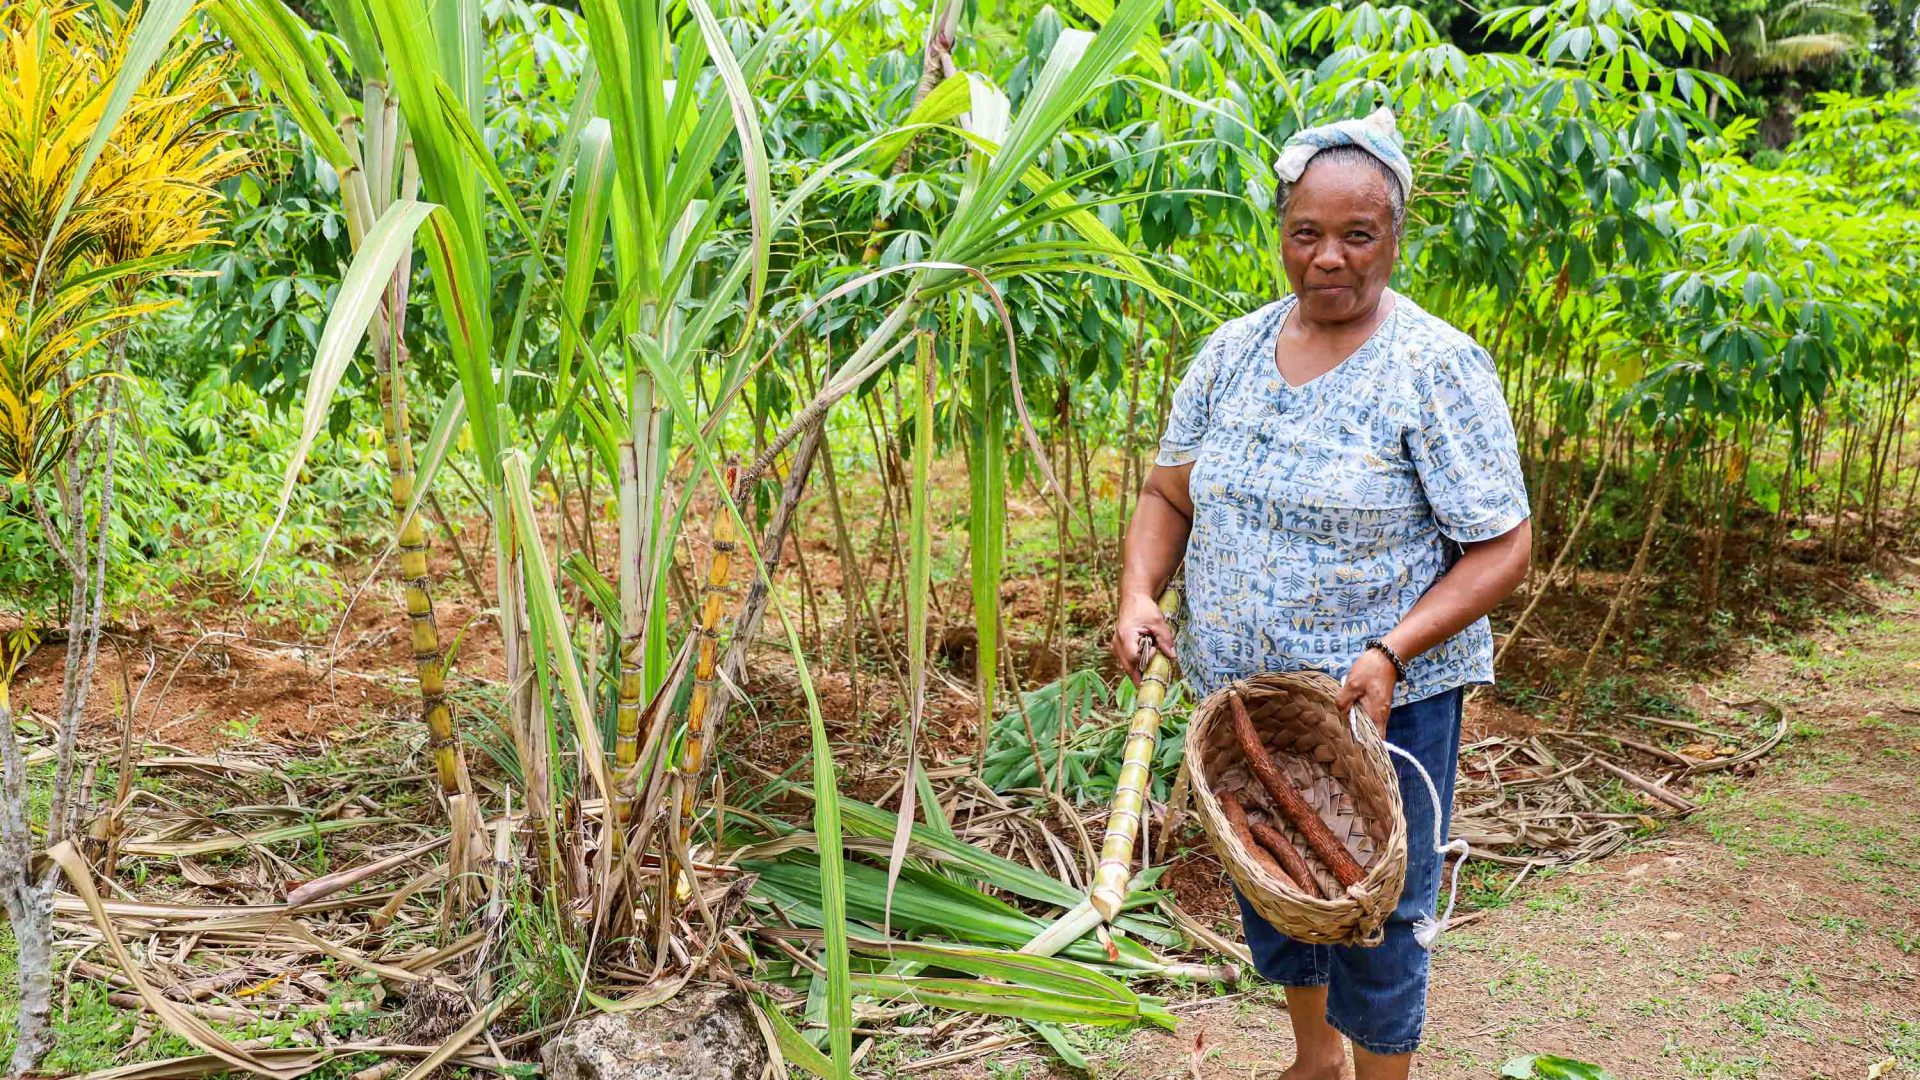 A woman works on the land harvesting vegetables.